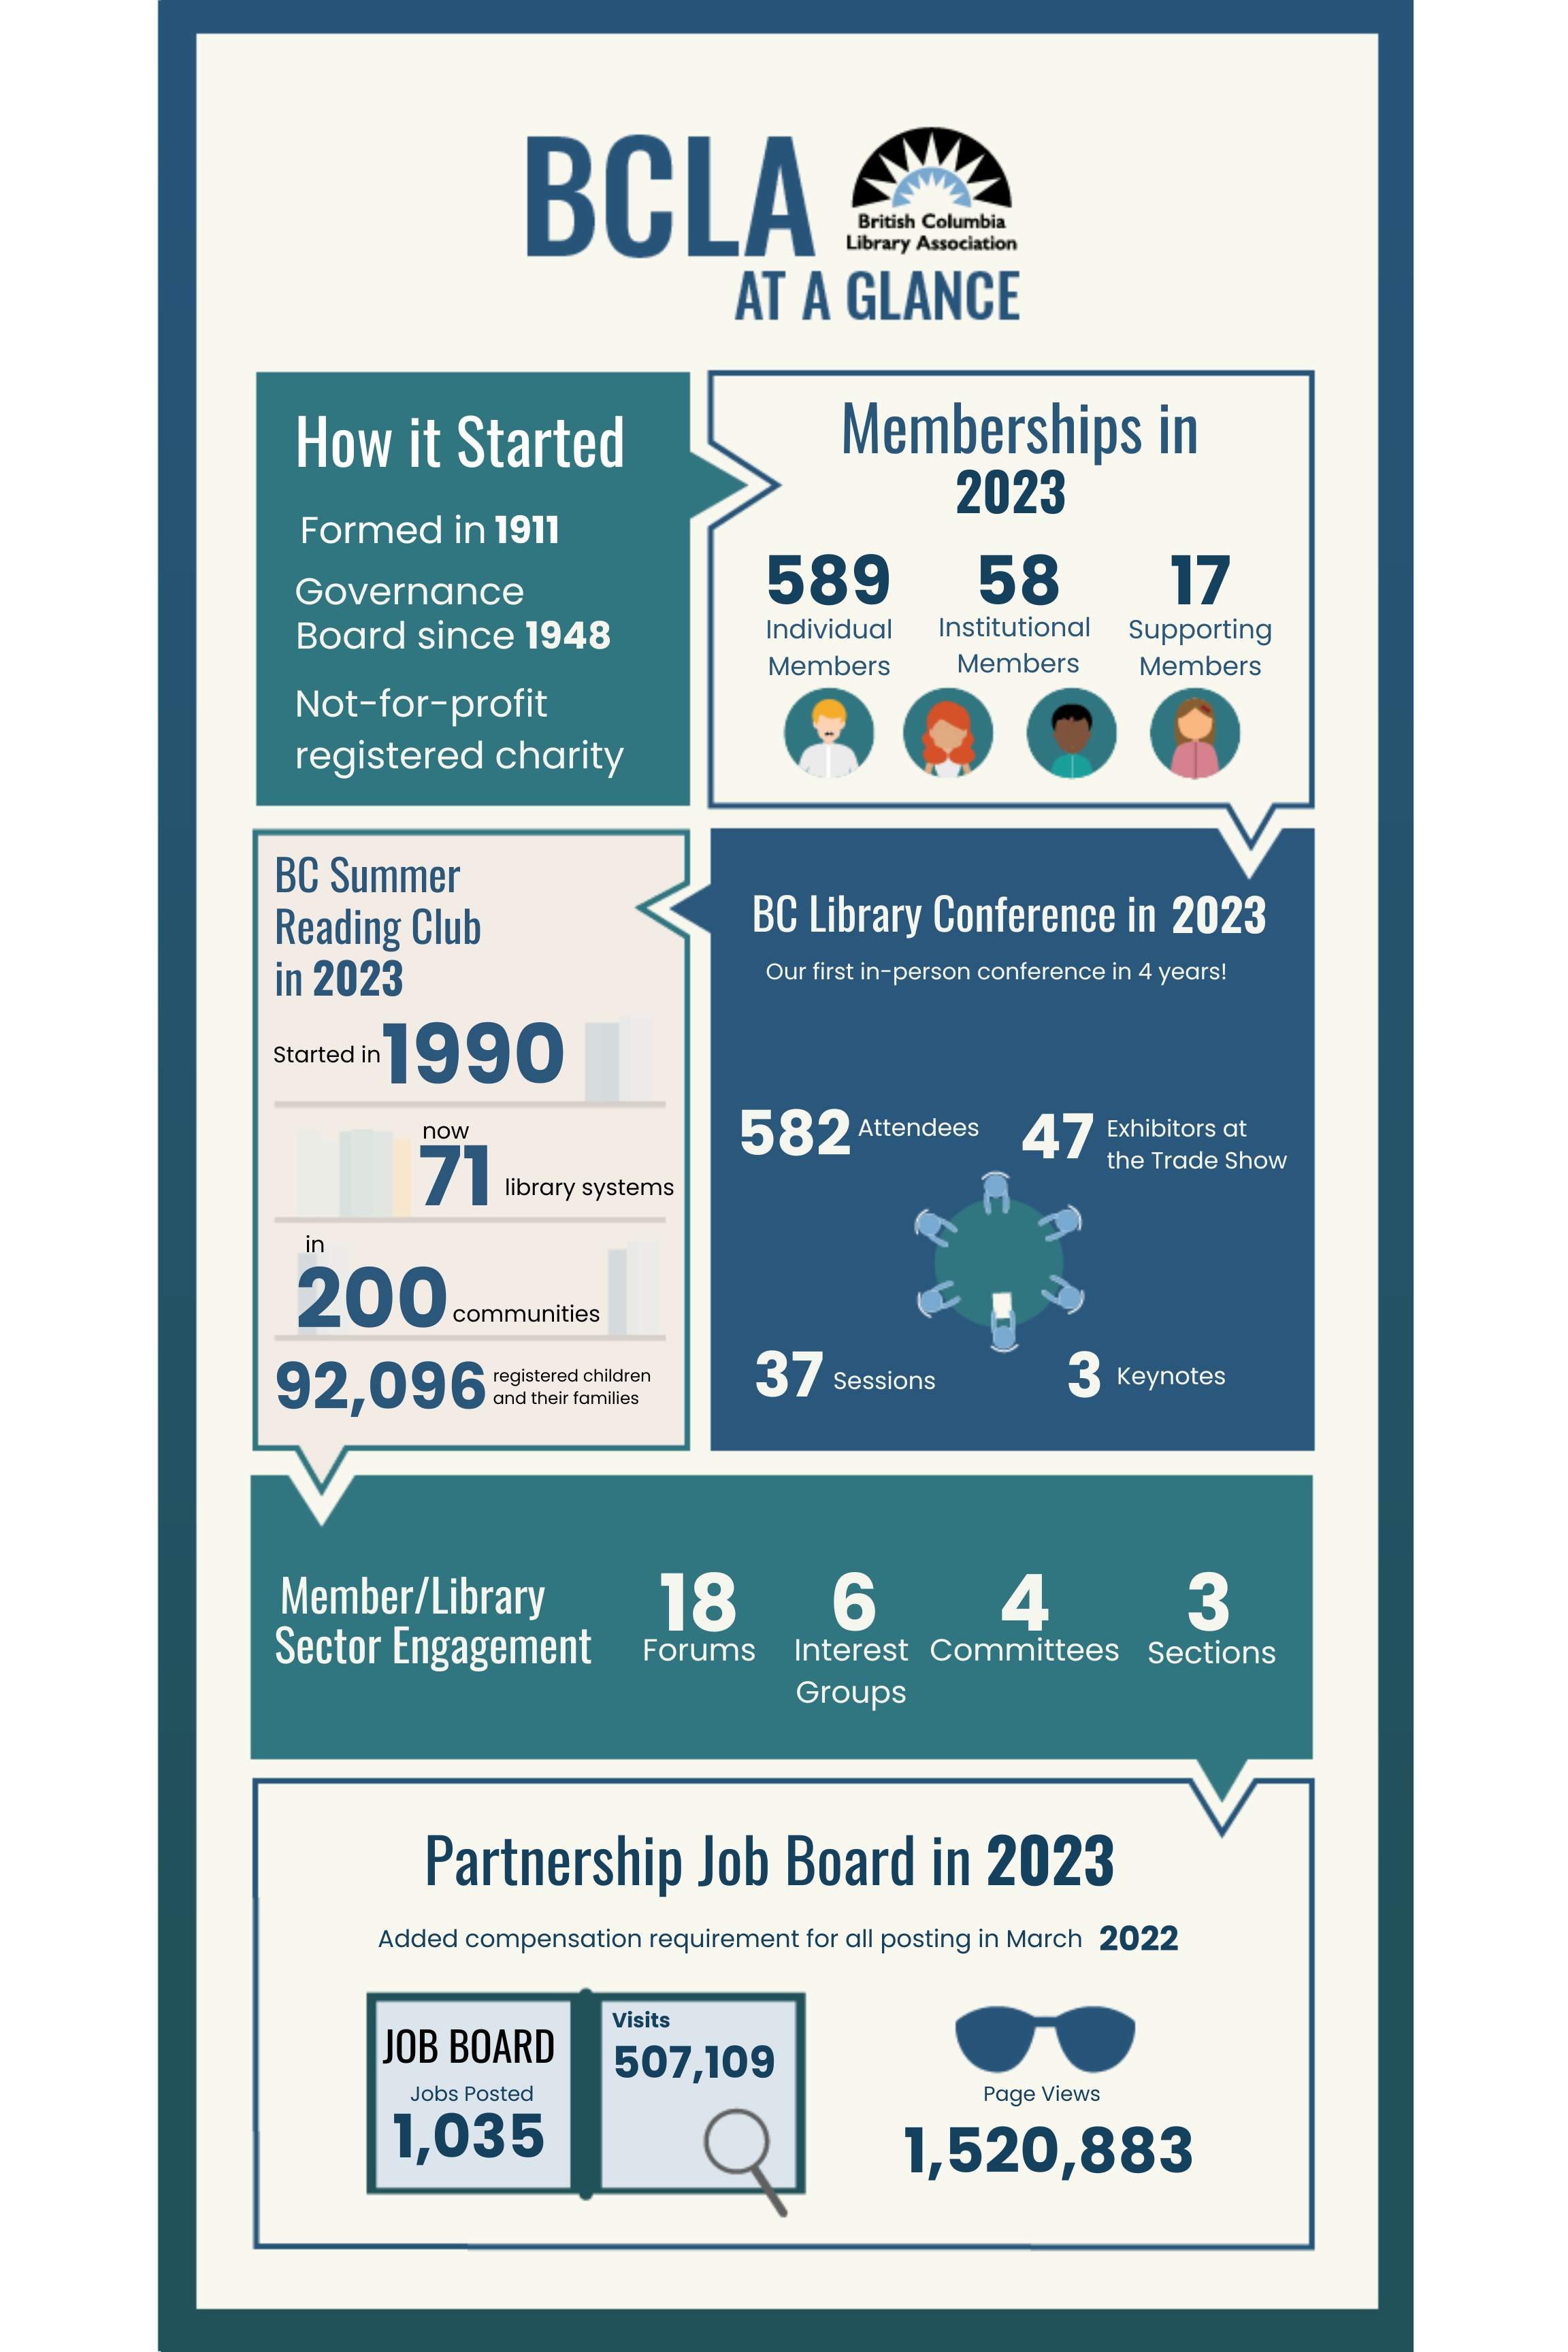 BCLA Infographic:<br />
How it Started<br />
Formed in 1911<br />
Governance Board since 1948<br />
Not-for-profit registered charity</p>
<p>Memberships in 2023<br />
586 Individual Members<br />
58 Institutional Members<br />
17 Supporting Members</p>
<p>BC Summer Reading Club in 2023<br />
started in 1990<br />
Now 71 library systems<br />
in 200 communities<br />
92,096 registered children and their families</p>
<p>BC Library Conference in 2023<br />
Our first in-person conference in 4 years!<br />
582 Attendees<br />
47 Exhibitors at the Trade Show<br />
3 Keynotes<br />
37 Sessions</p>
<p>Member/Library Sector Engagement<br />
18 Forums<br />
6 Interest Groups<br />
4 Committees<br />
3 Sections</p>
<p>Partnership Job Board in 2023<br />
Added compensation requirement for all postings in March 2022<br />
JOB BOARD Jobs posted 1,035<br />
Visits 507,109<br />
Page Views 1,520,883<br />
